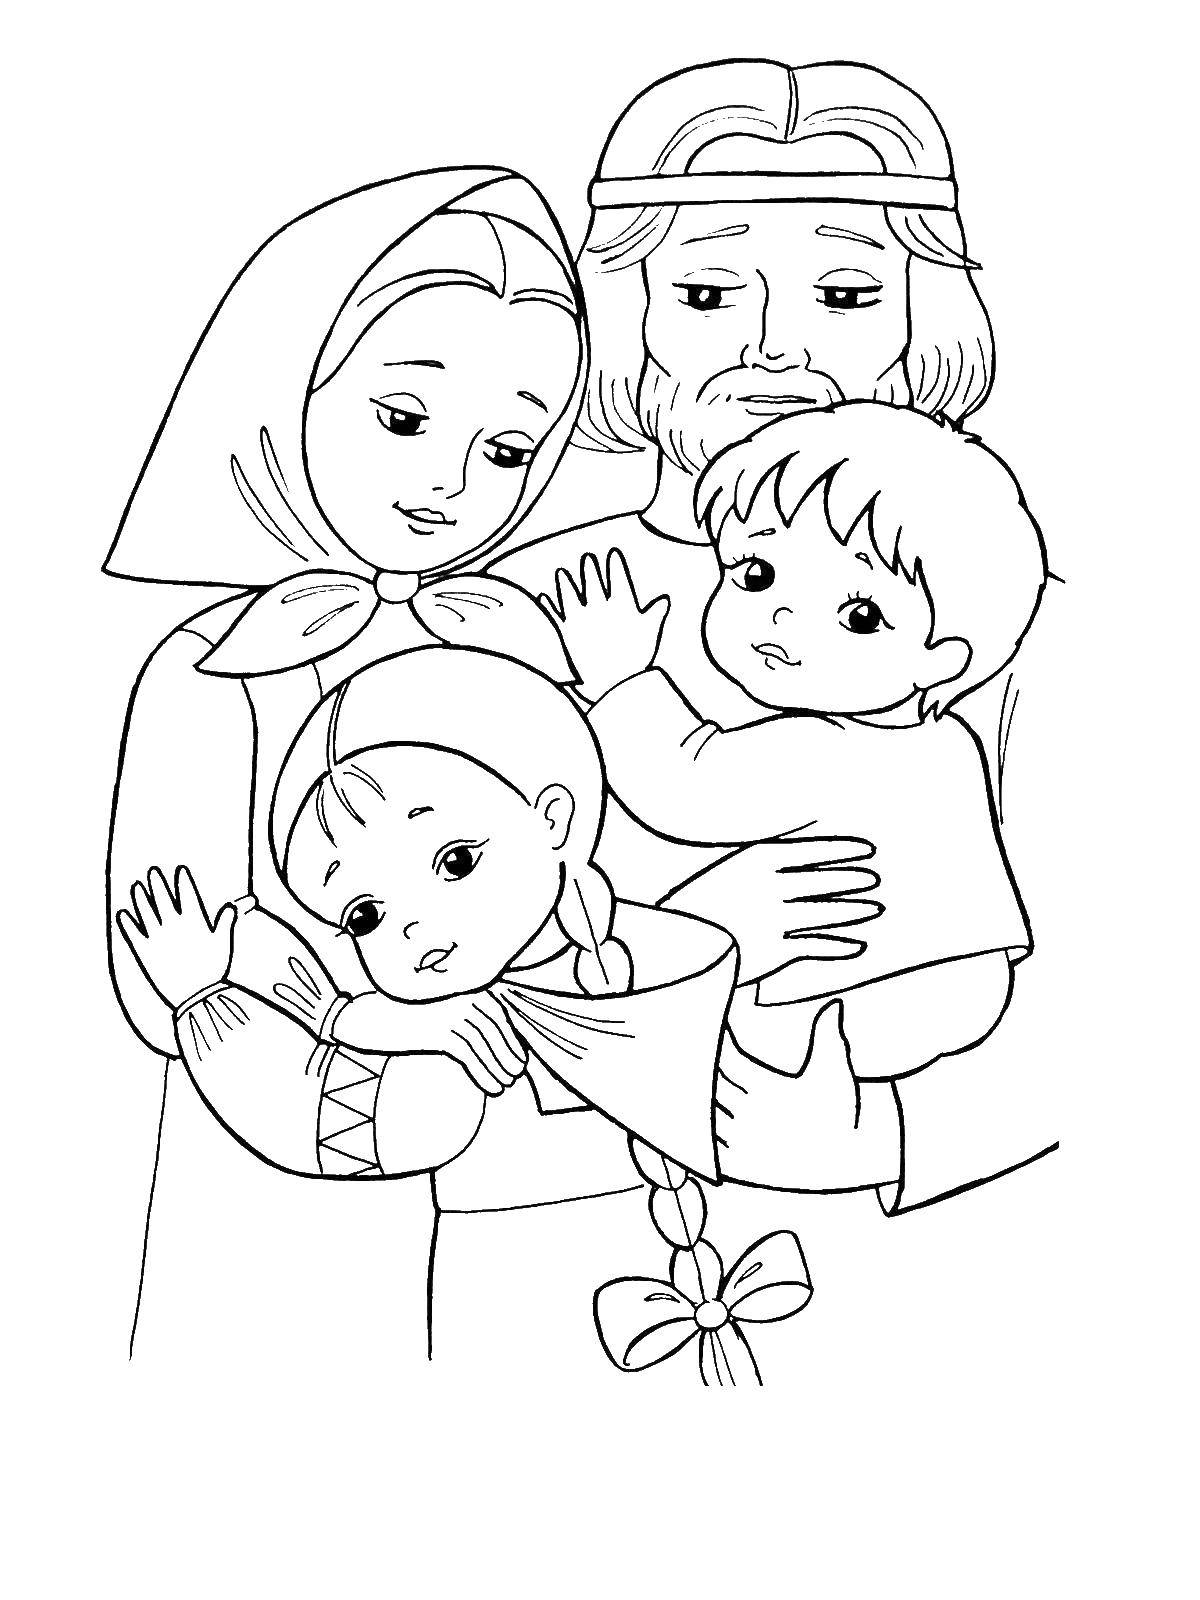 Coloring Parents hug their children. Category Family. Tags:  Family, parents, children.